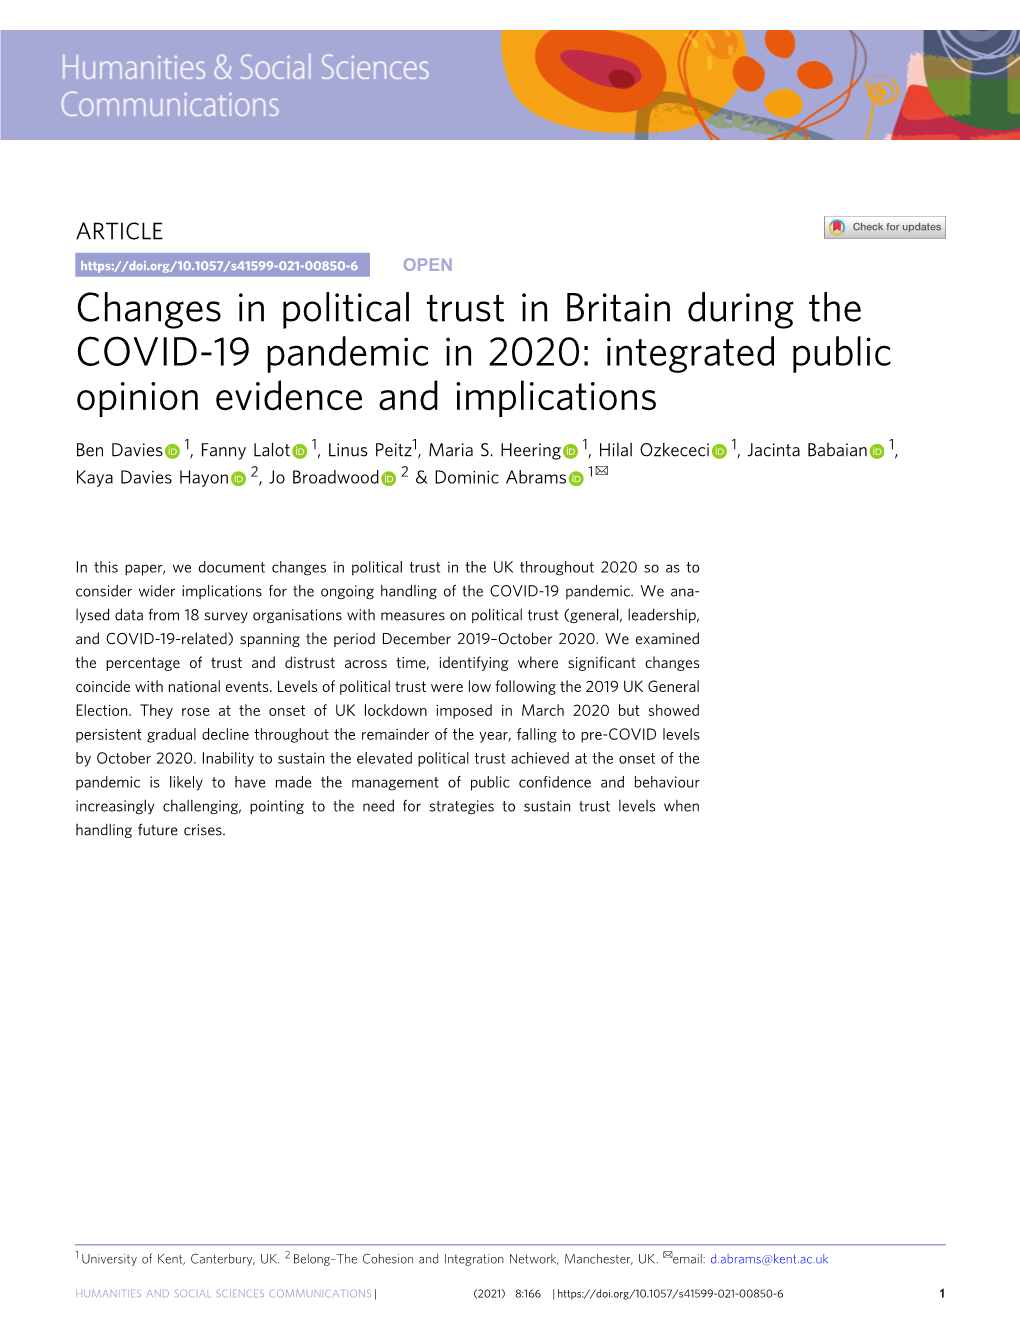 Changes in Political Trust in Britain During the COVID-19 Pandemic in 2020: Integrated Public Opinion Evidence and Implications